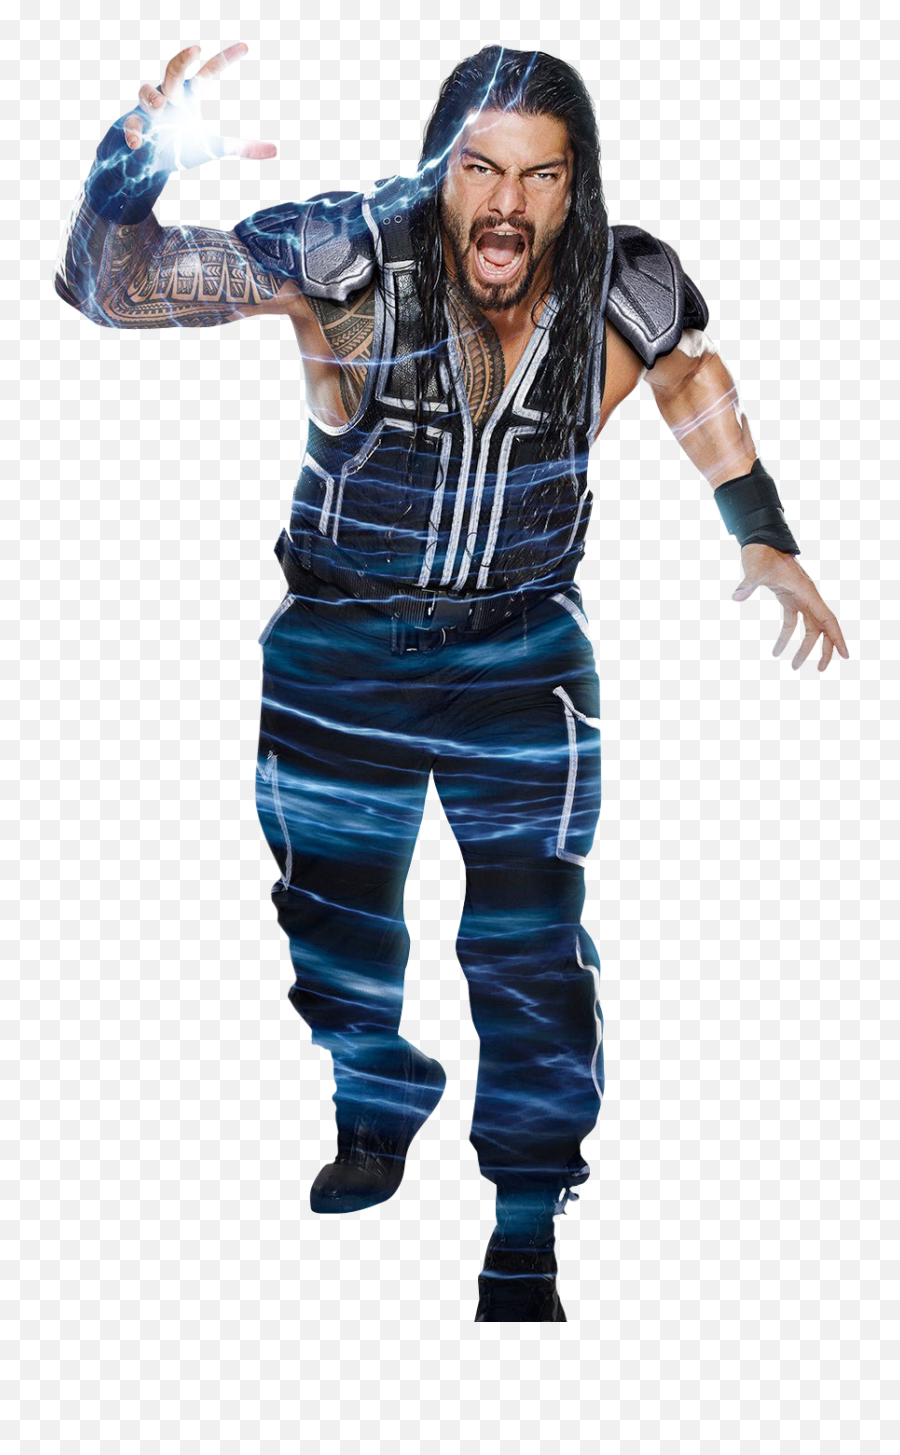 Download Roman Reigns Nxt Attire Download - Roman Reigns New Roman Reigns Old Costume Emoji,Roman Reigns Png